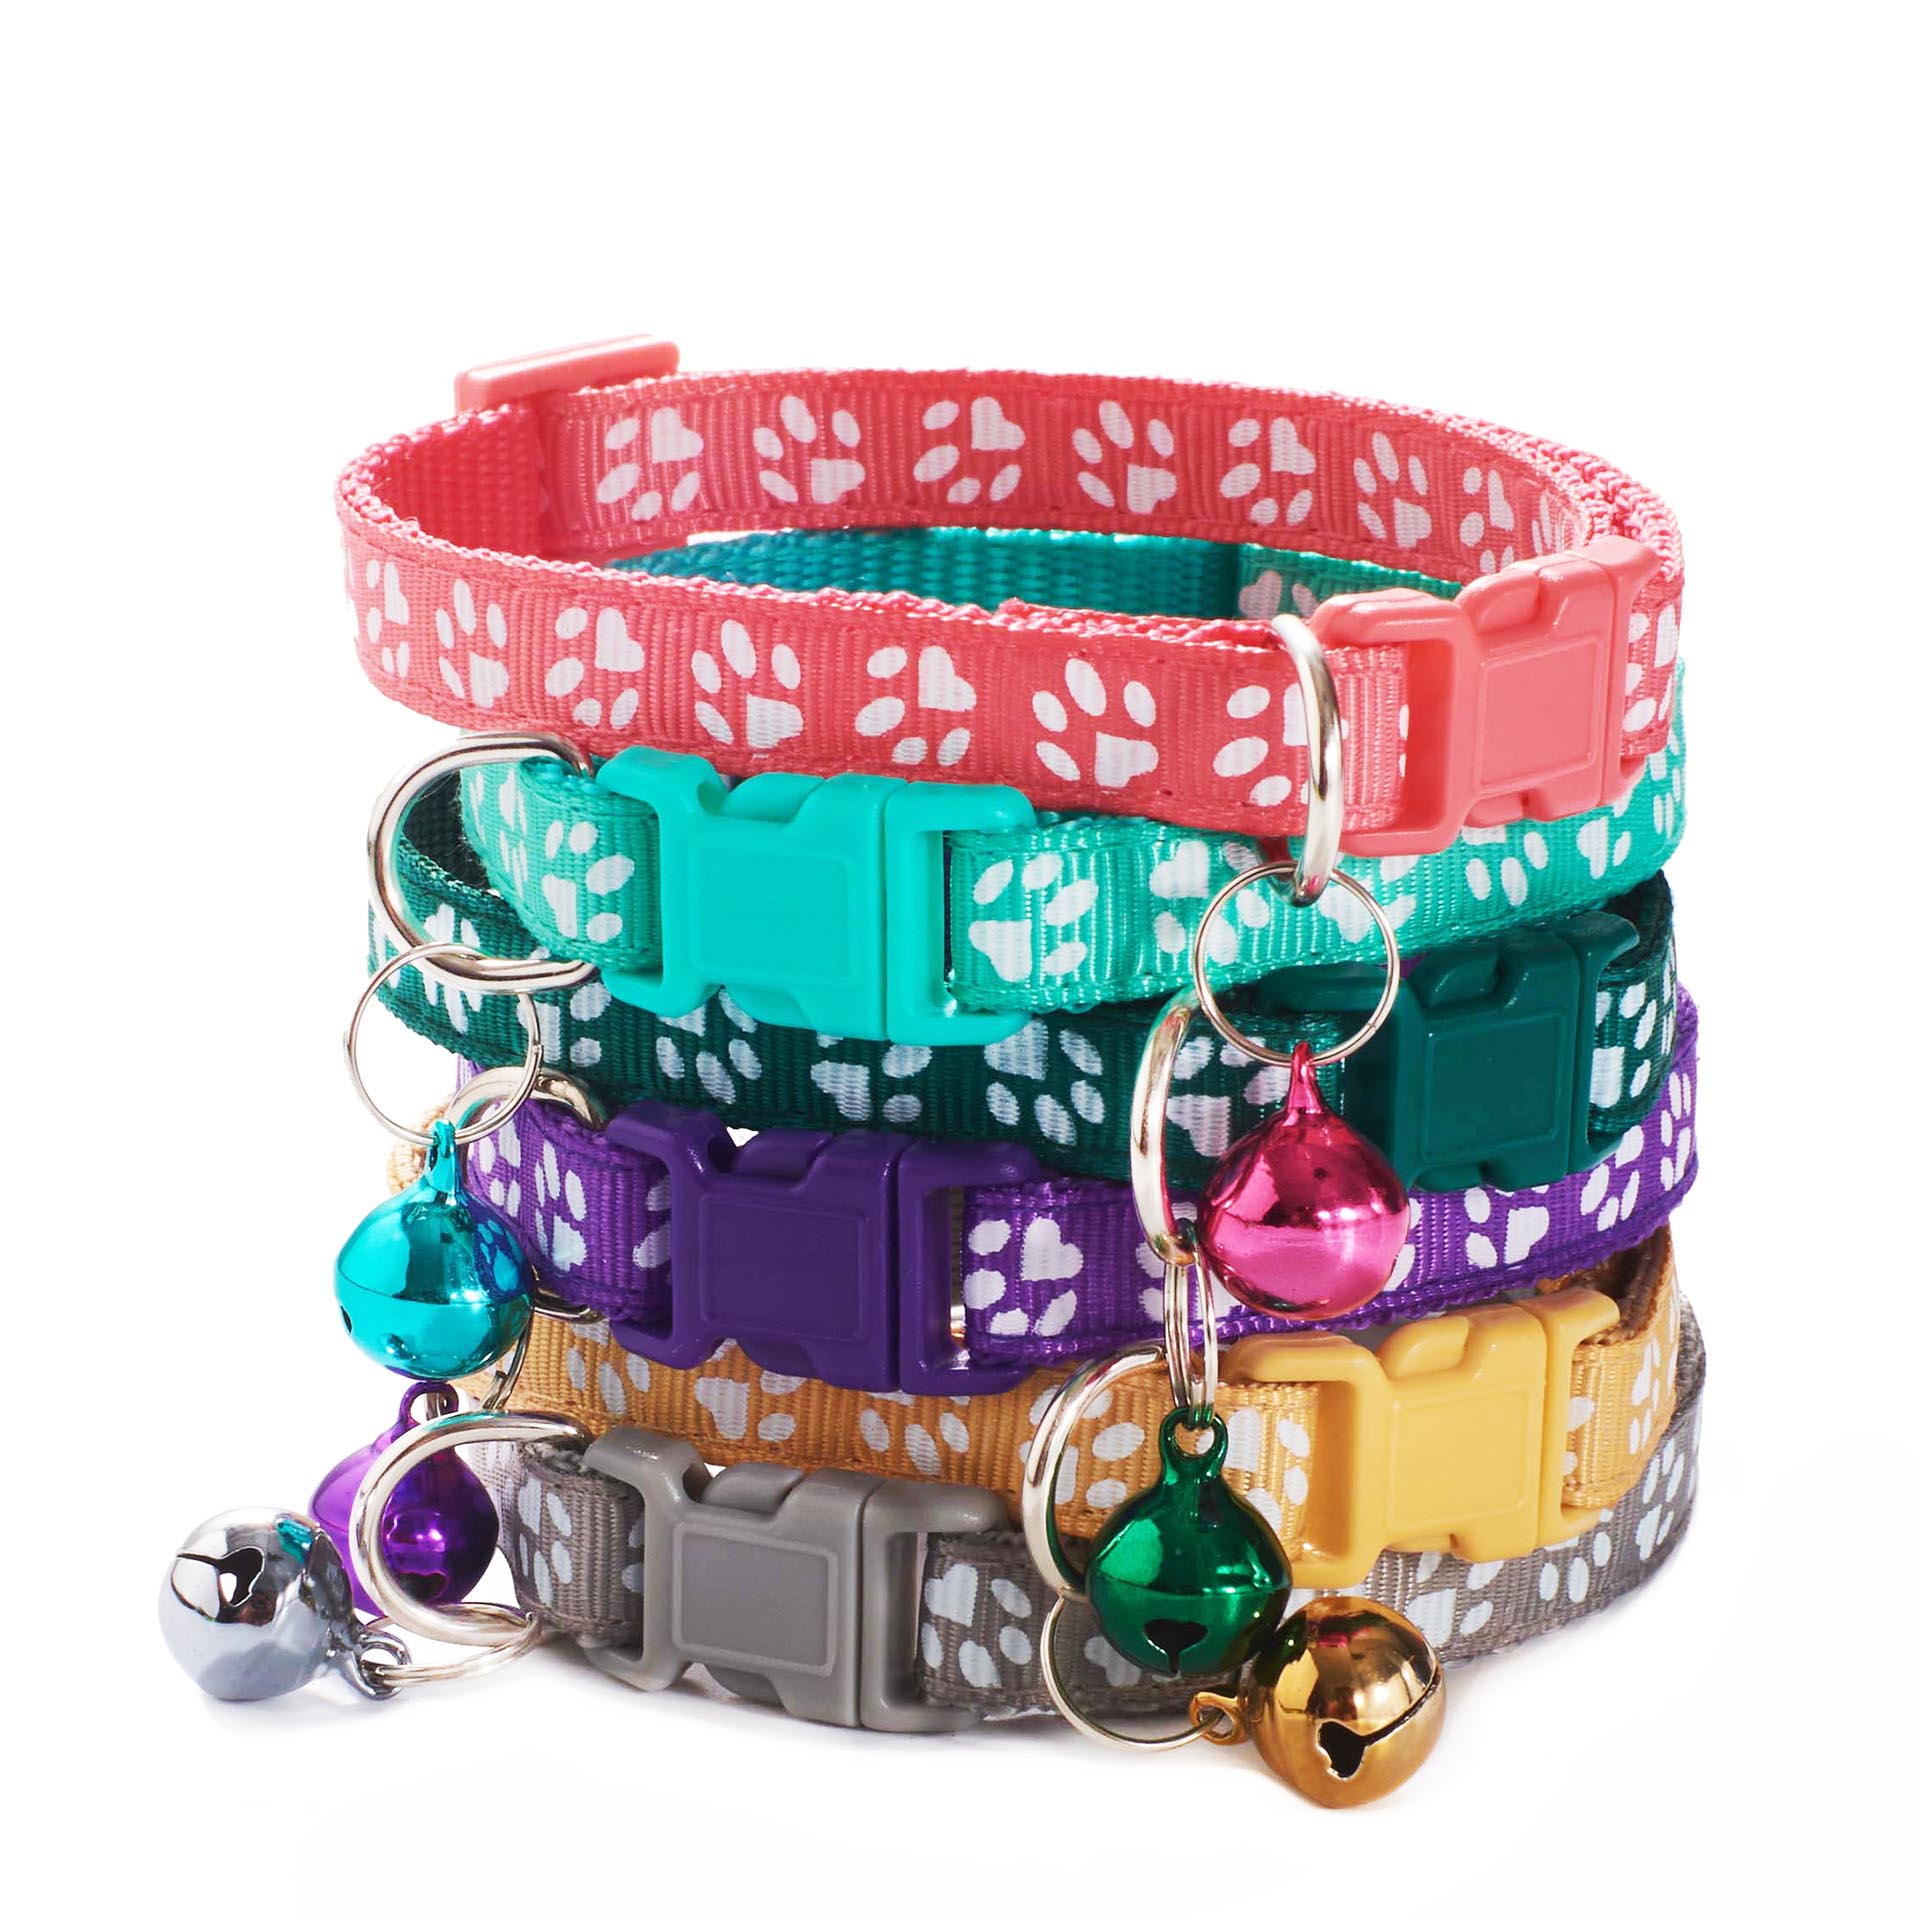 Paw print cat collar with ring bell